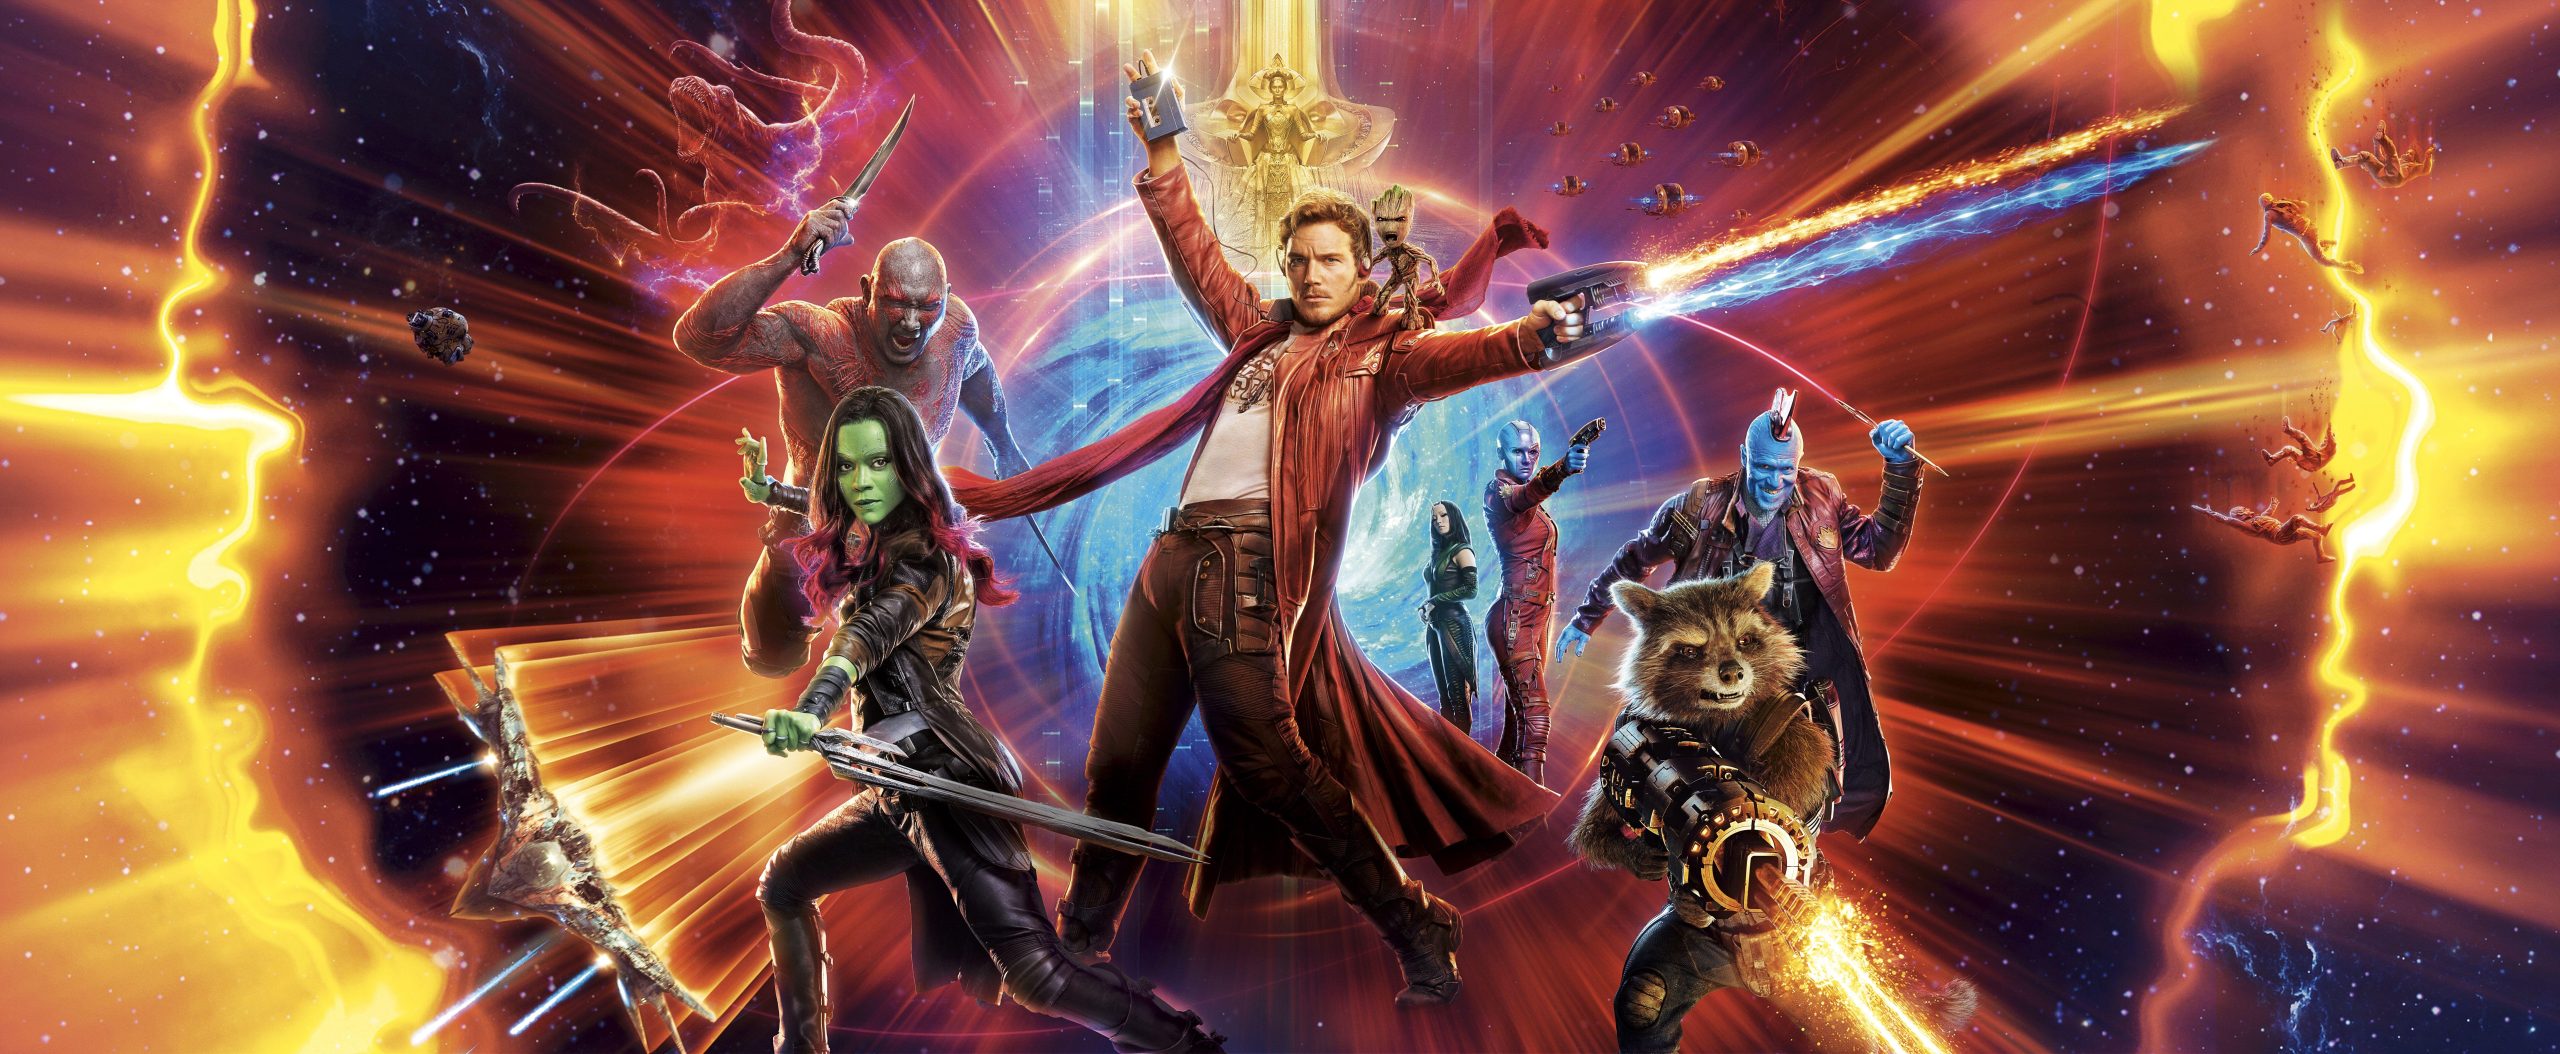 Guardians Of The Galaxy Poster 2023 Wallpaper 4k, Guardians Of The Galaxy Poster 2023, Movies